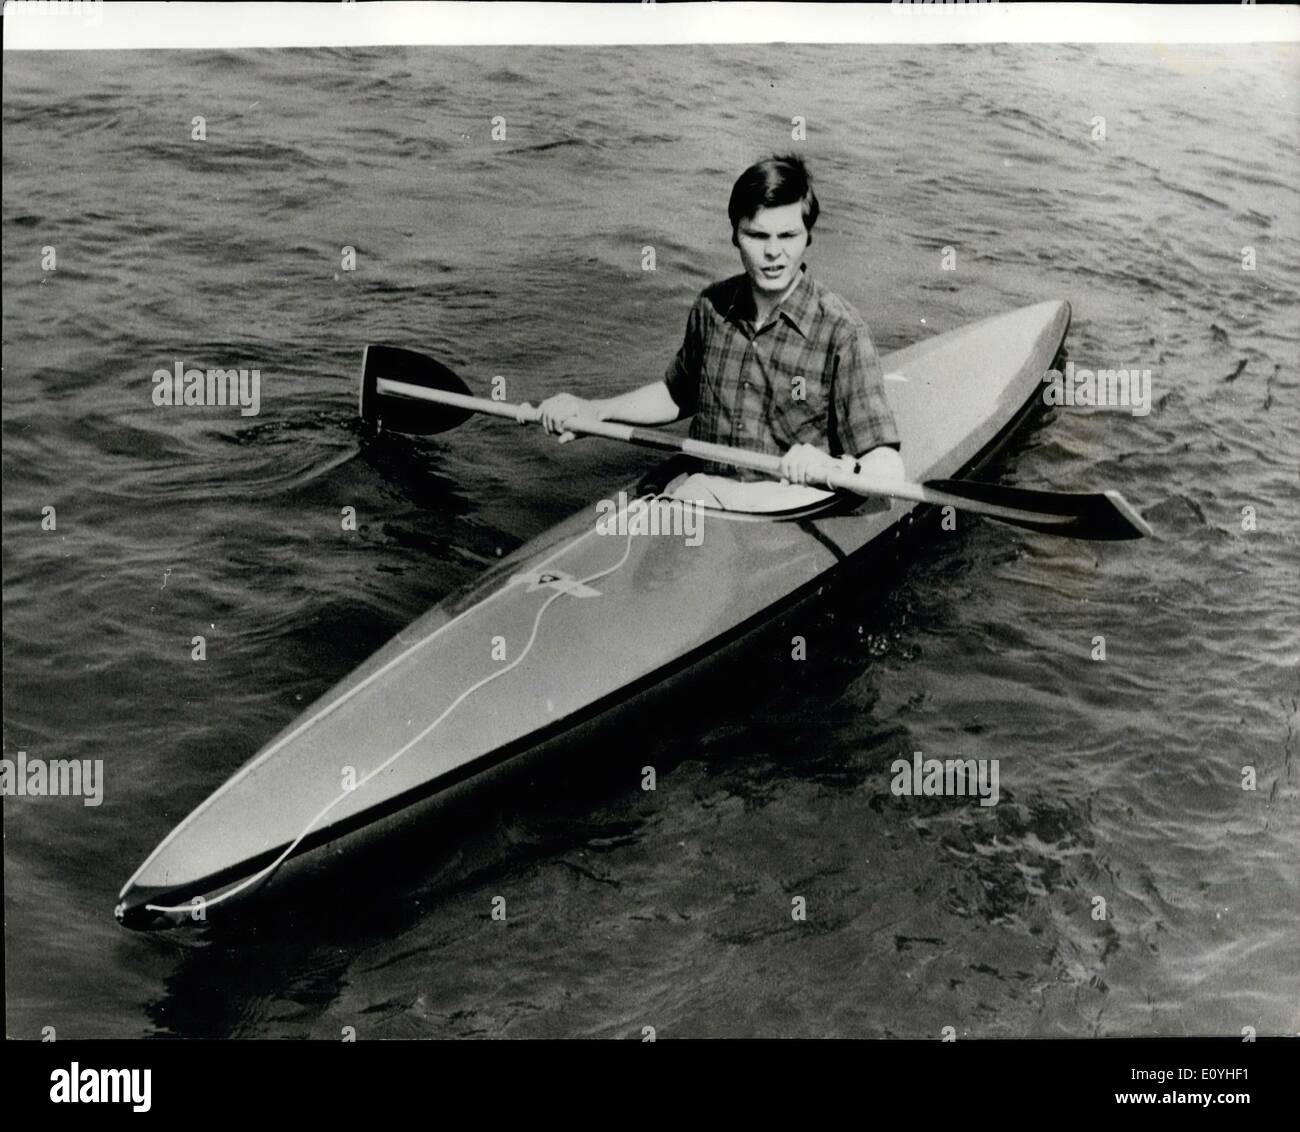 Jun. 06, 1970 - Klaus Pechstein now hopes to cross the artic in a Kayak : Klaus Pechstein, the German, who accomplished the feat of Swimming down the Rhine from its source to Rotterdam last Autumn, has now started and even more intrepid adventure. In a small Kayak - boat he was set out to cross the artic which is expected to take him about five months. Pechestien wants to prove that the Nomads had discovered the American continent earlier than the Vikings. Photo shows Klaus Pechestein in his small Kayak in which he hopes to cross the Artic. Stock Photo